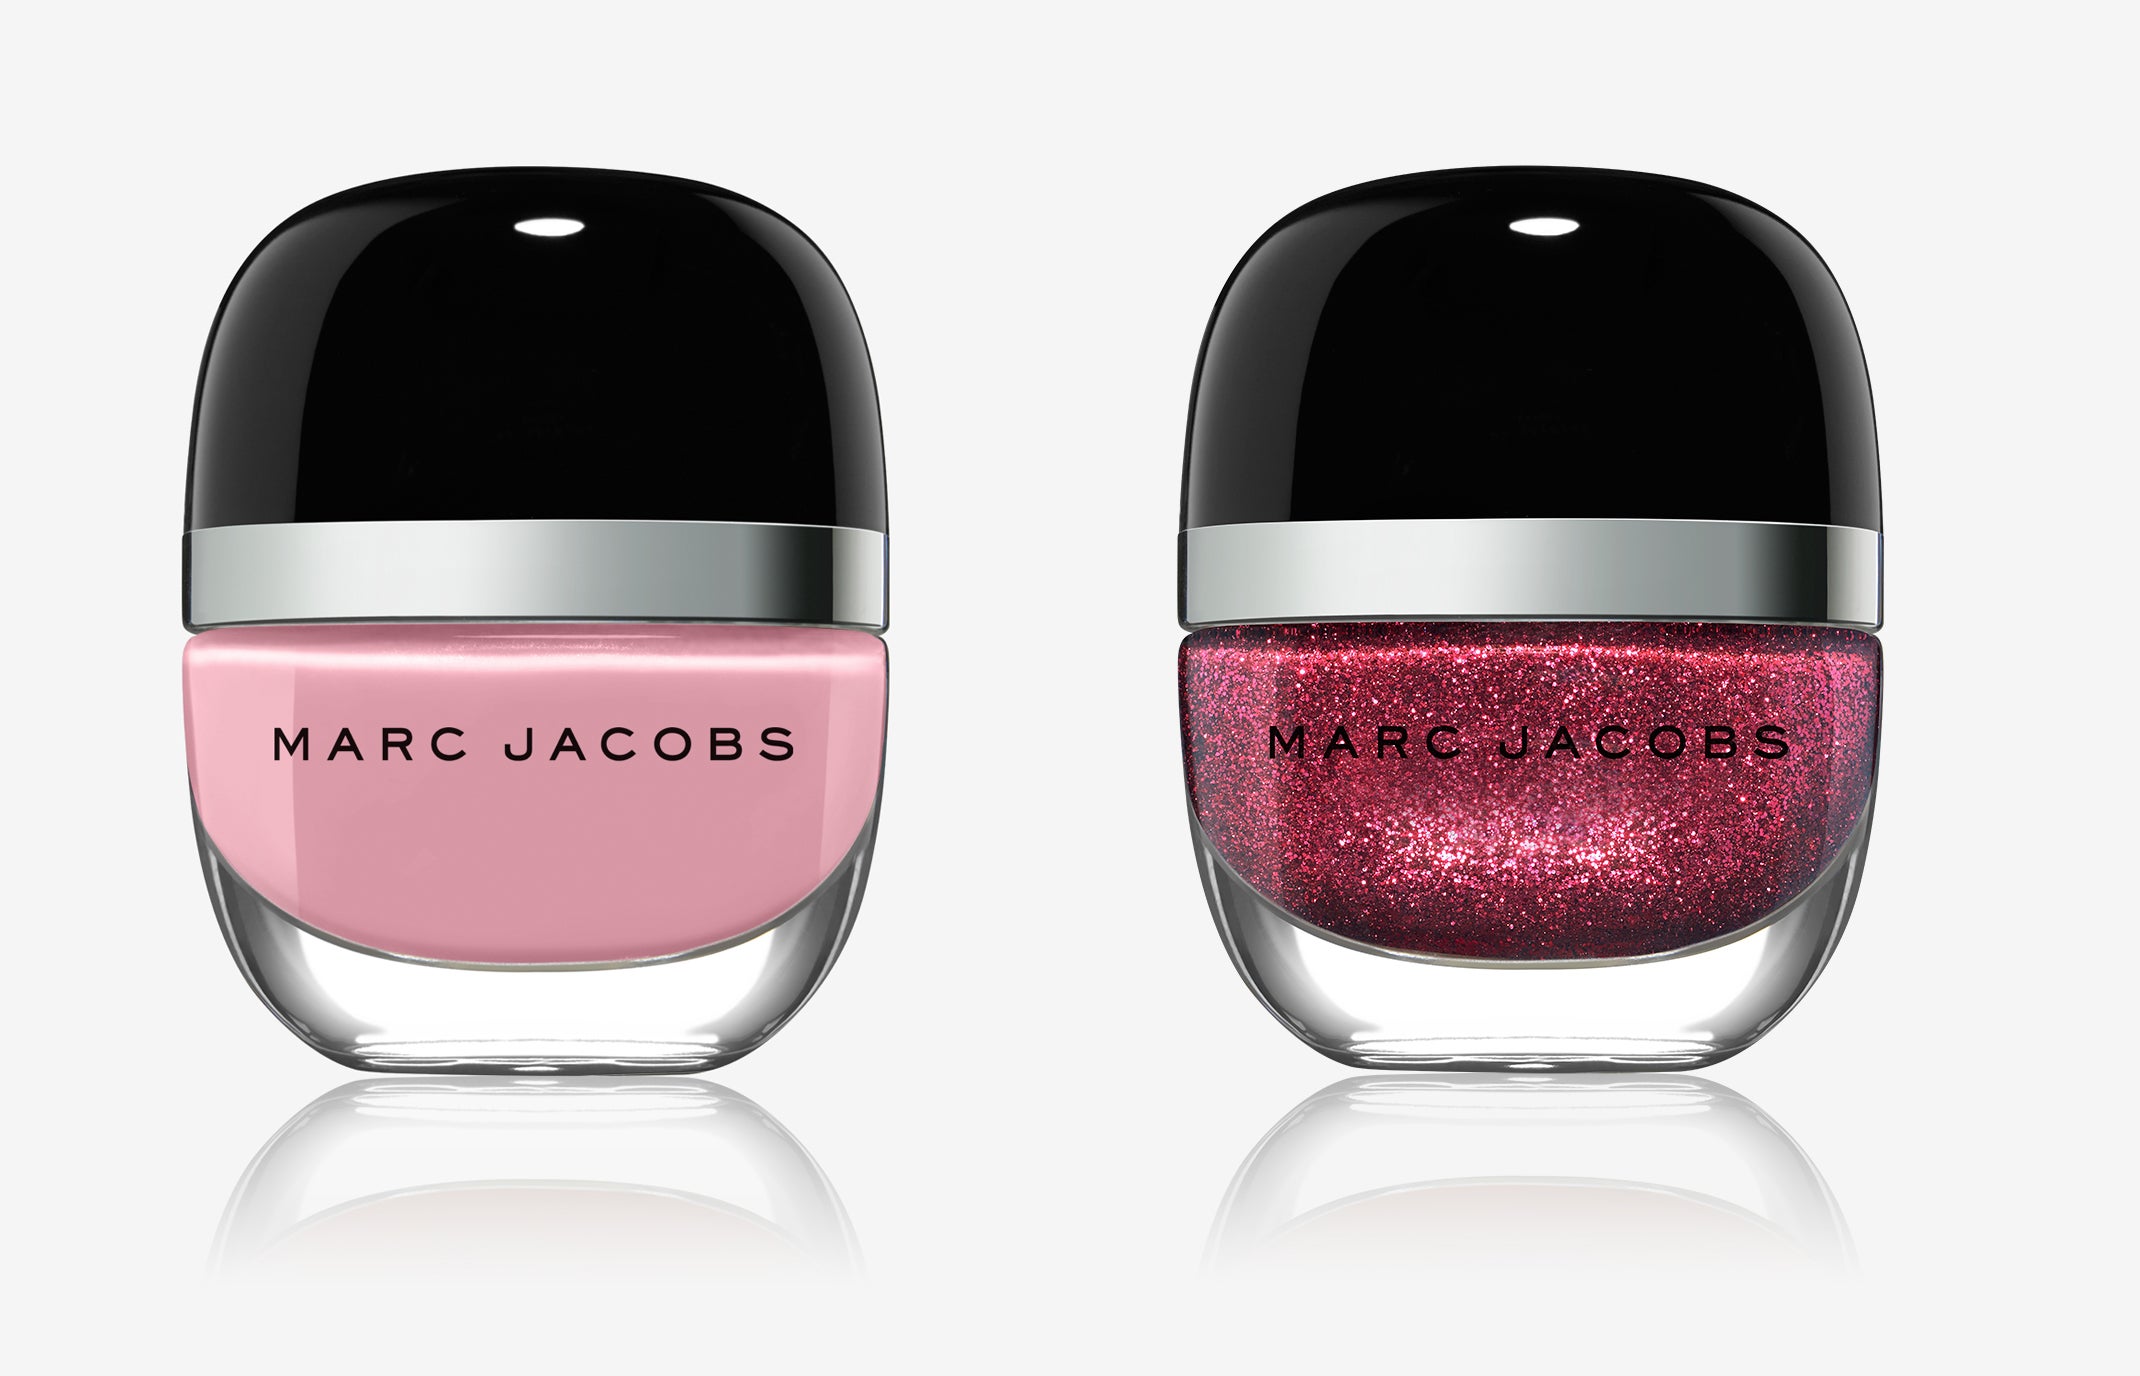 Marc Jacobs Nail Polish Is Buy One, Get One Half Price